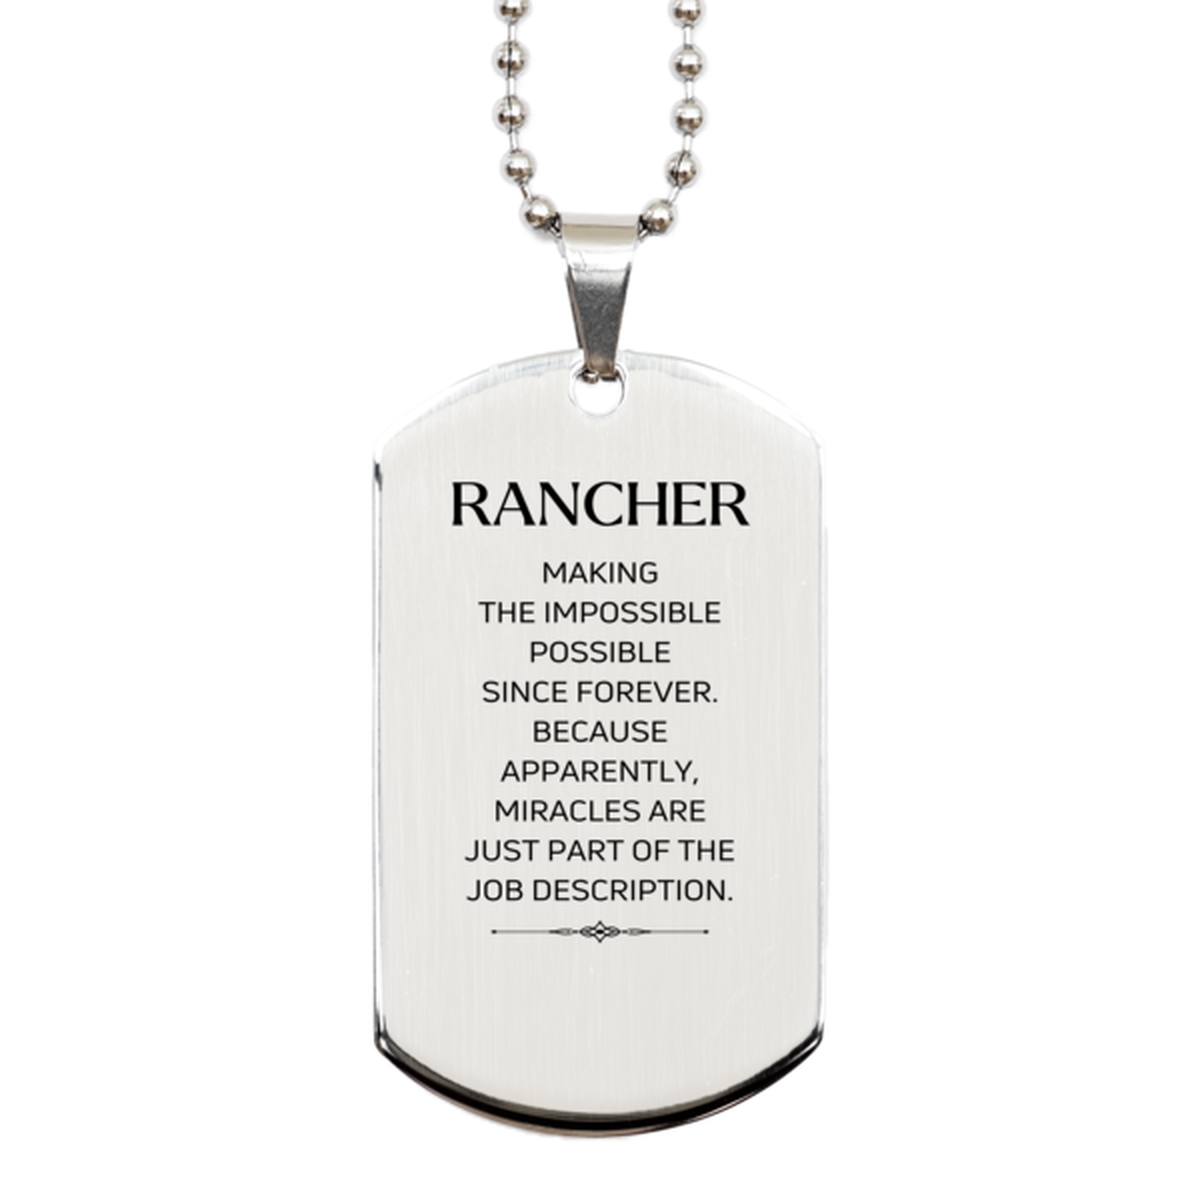 Funny Rancher Gifts, Miracles are just part of the job description, Inspirational Birthday Silver Dog Tag For Rancher, Men, Women, Coworkers, Friends, Boss